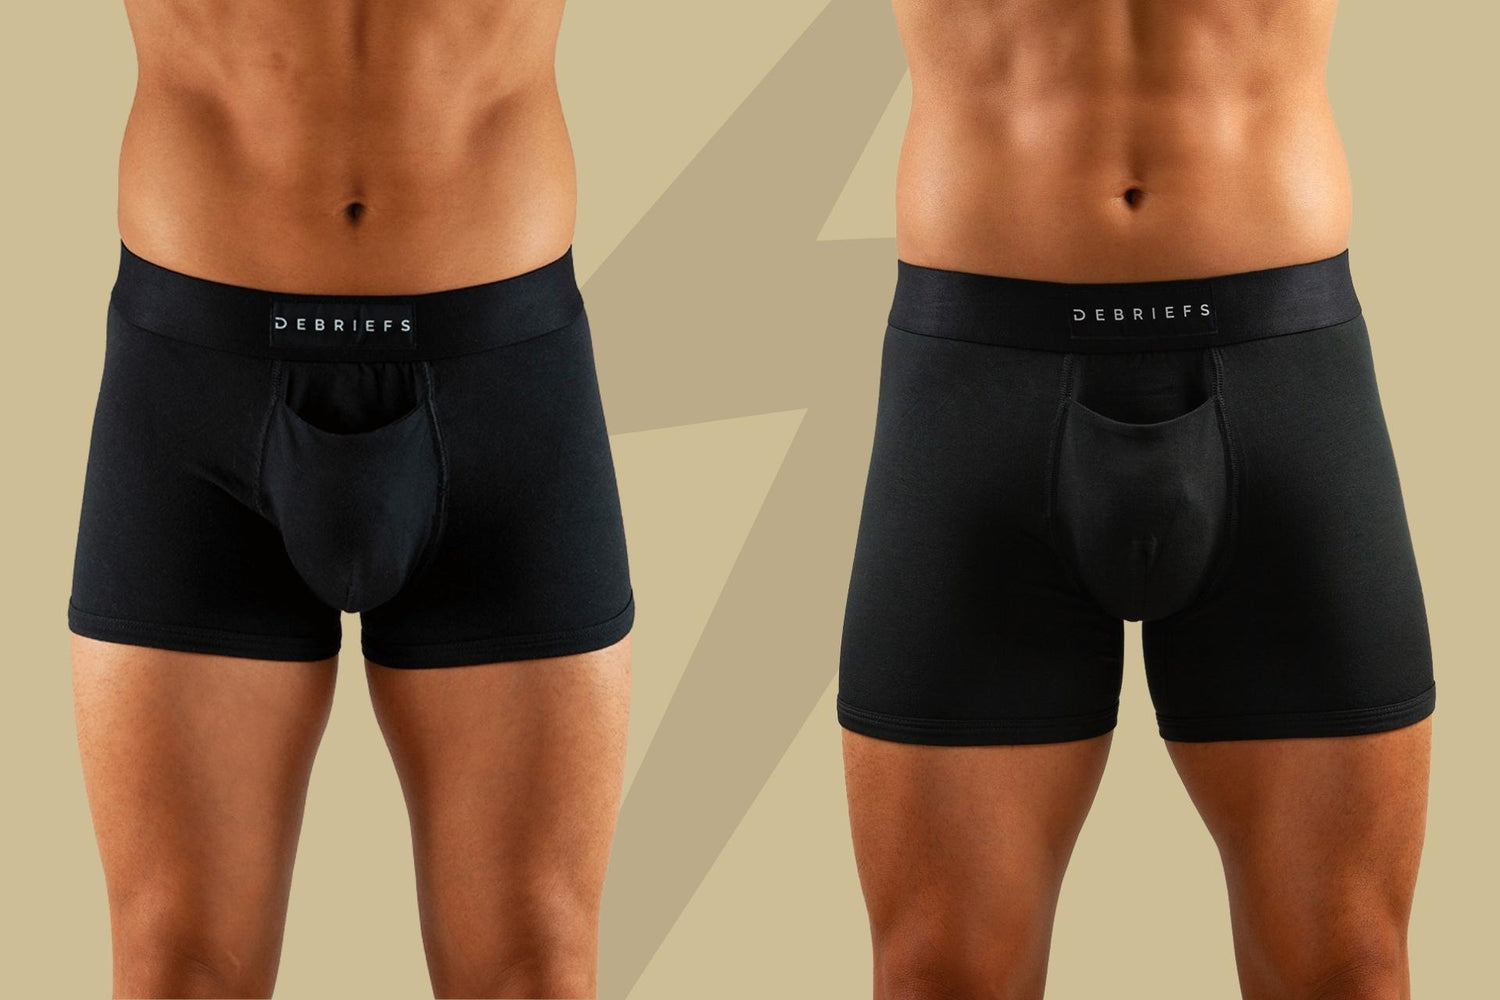 Trunks or Boxer Briefs: What's the Difference?